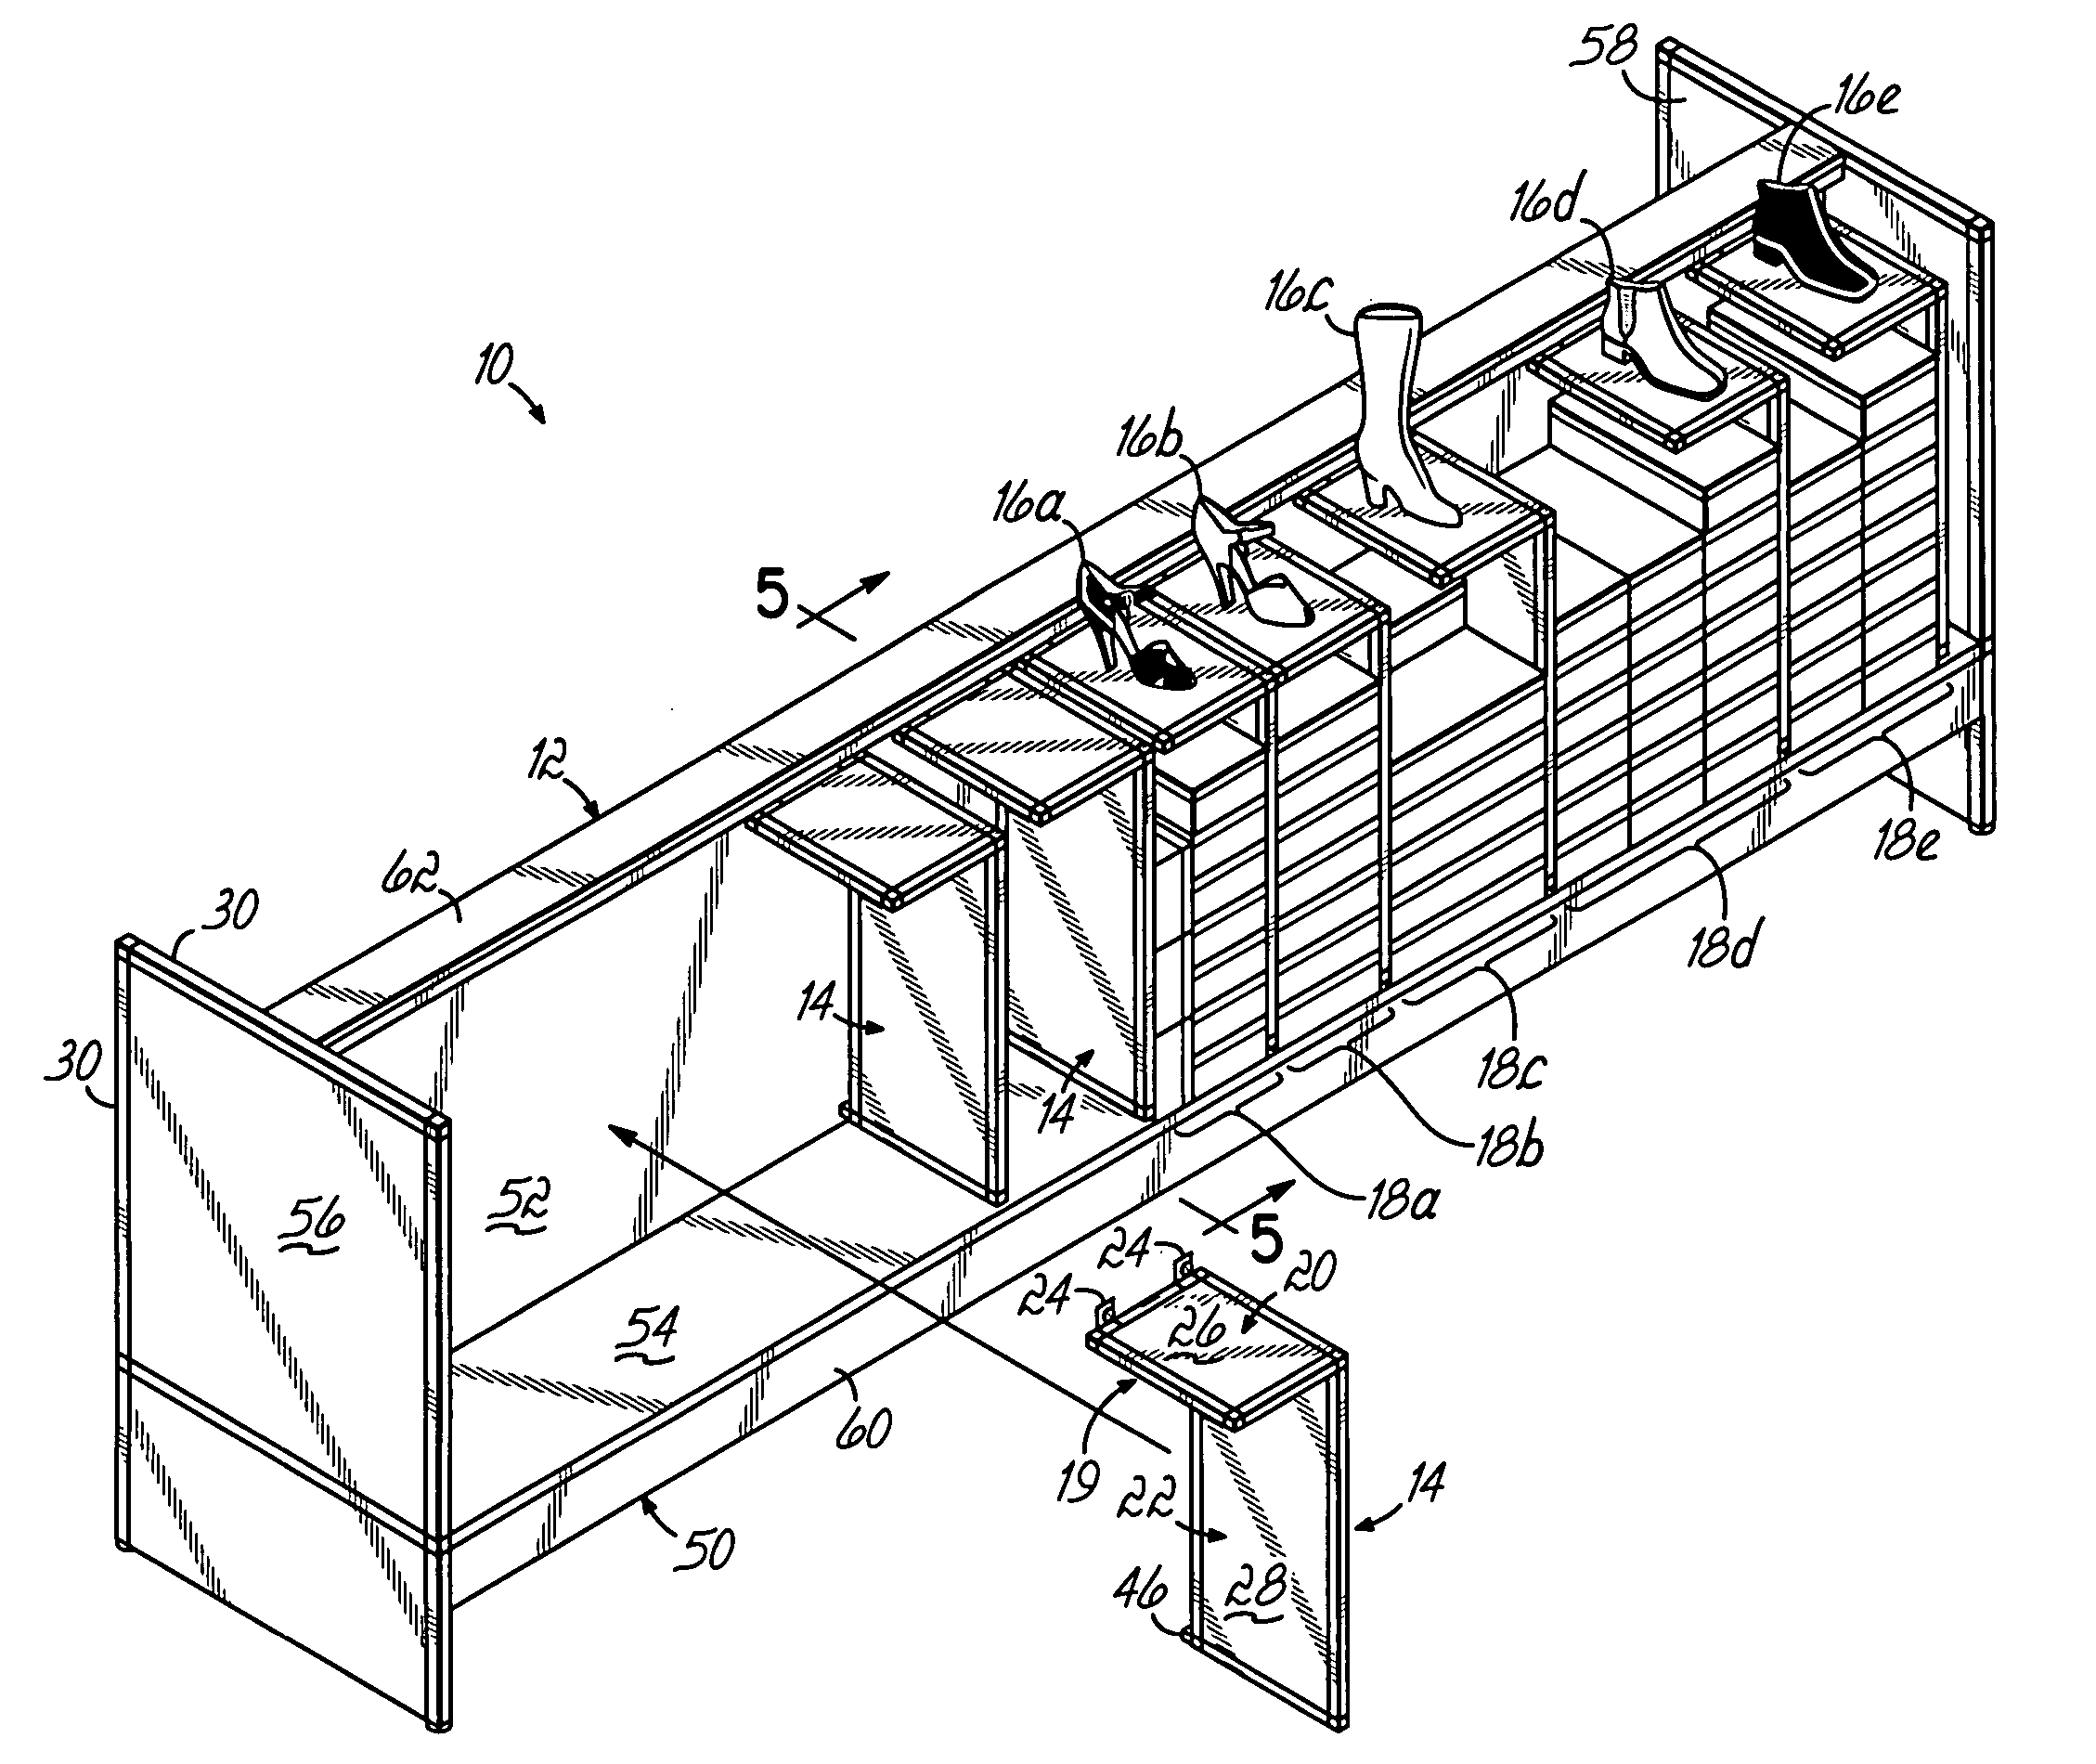 Modular footwear display and storage system and method